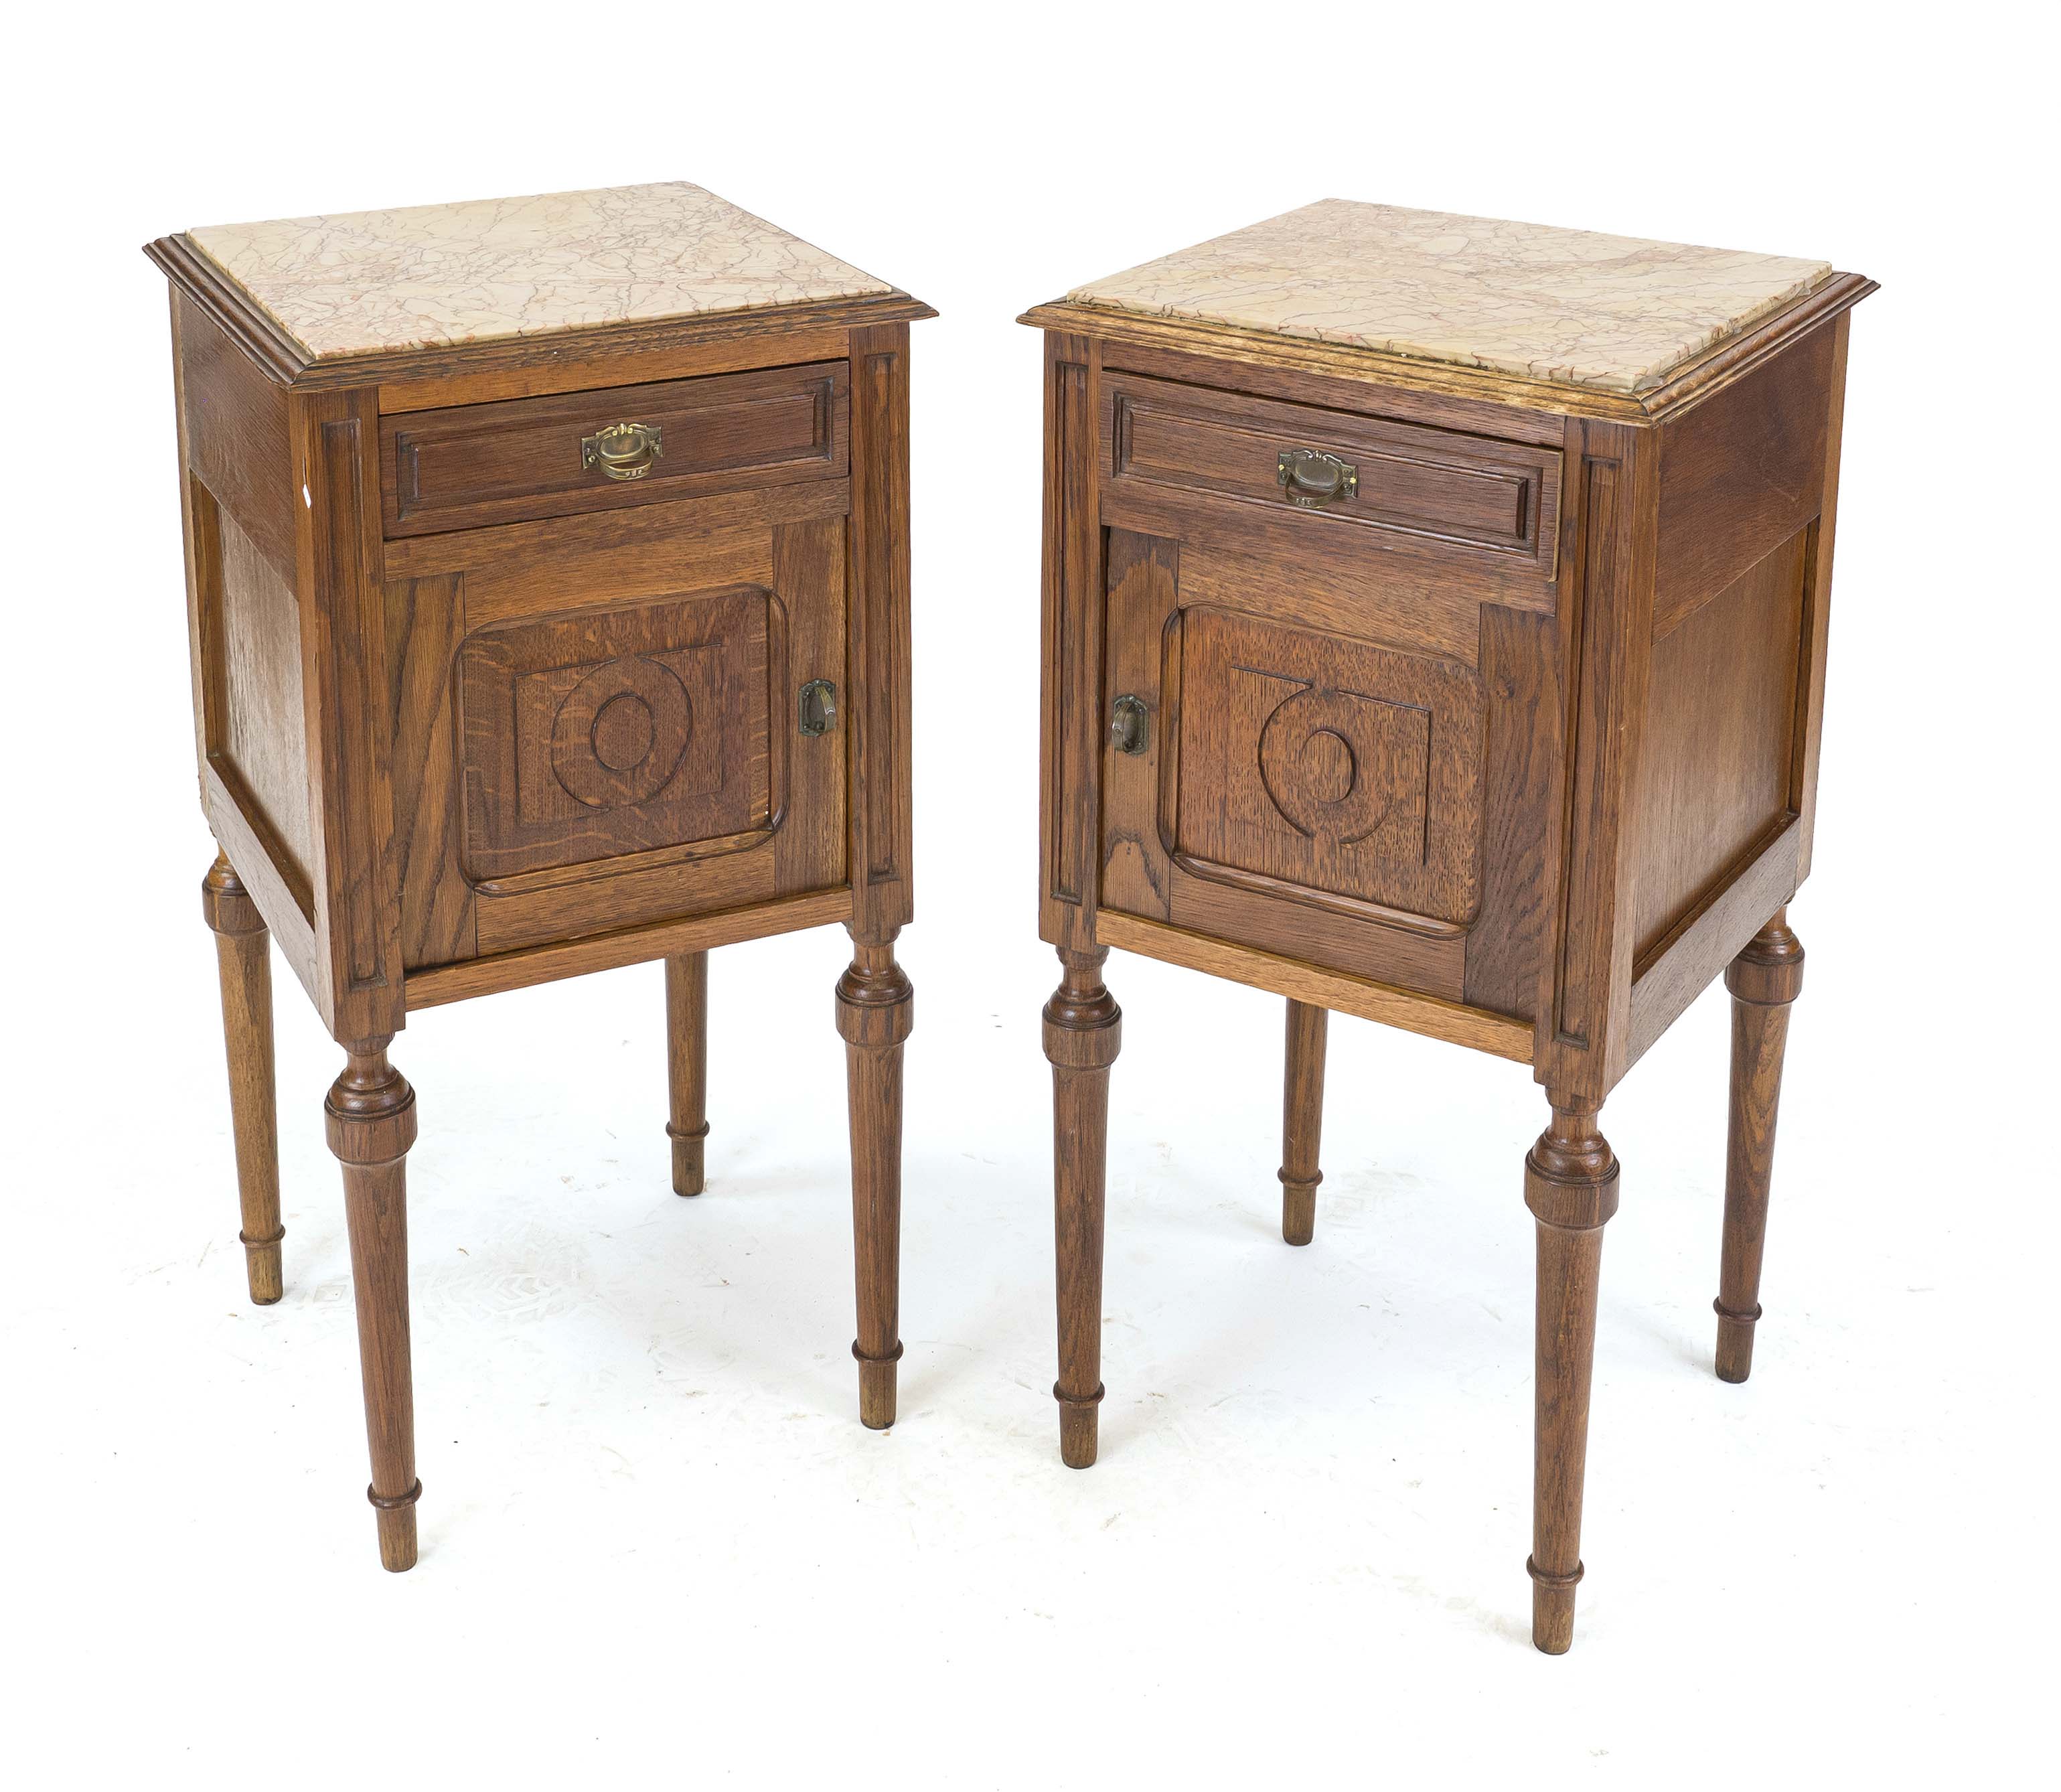 Pair of bedside/side cabinets, late 19th century, oak, 1-door body with drawer, inset beige veined